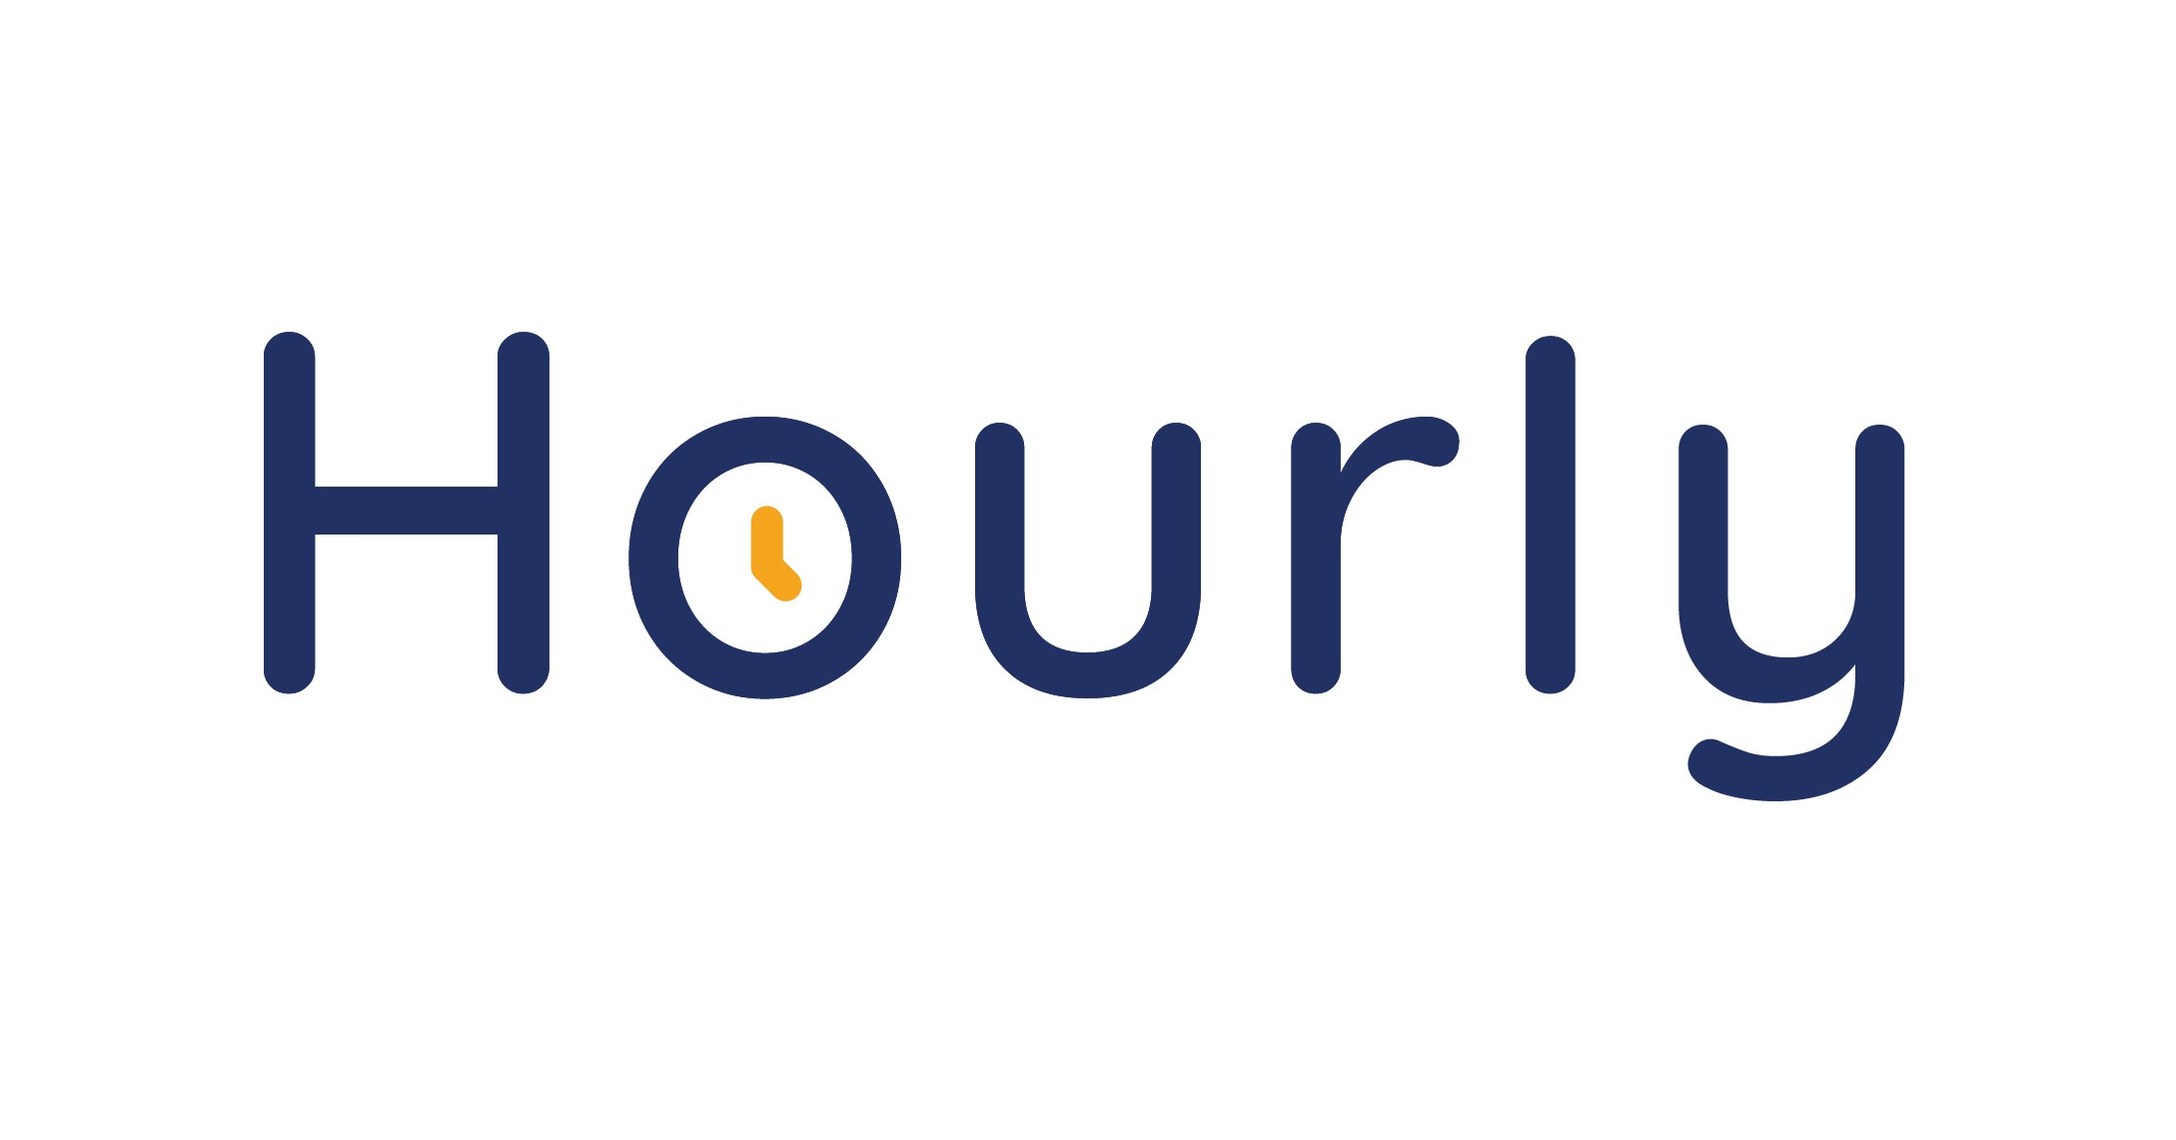 The official Hourly, Inc. logo